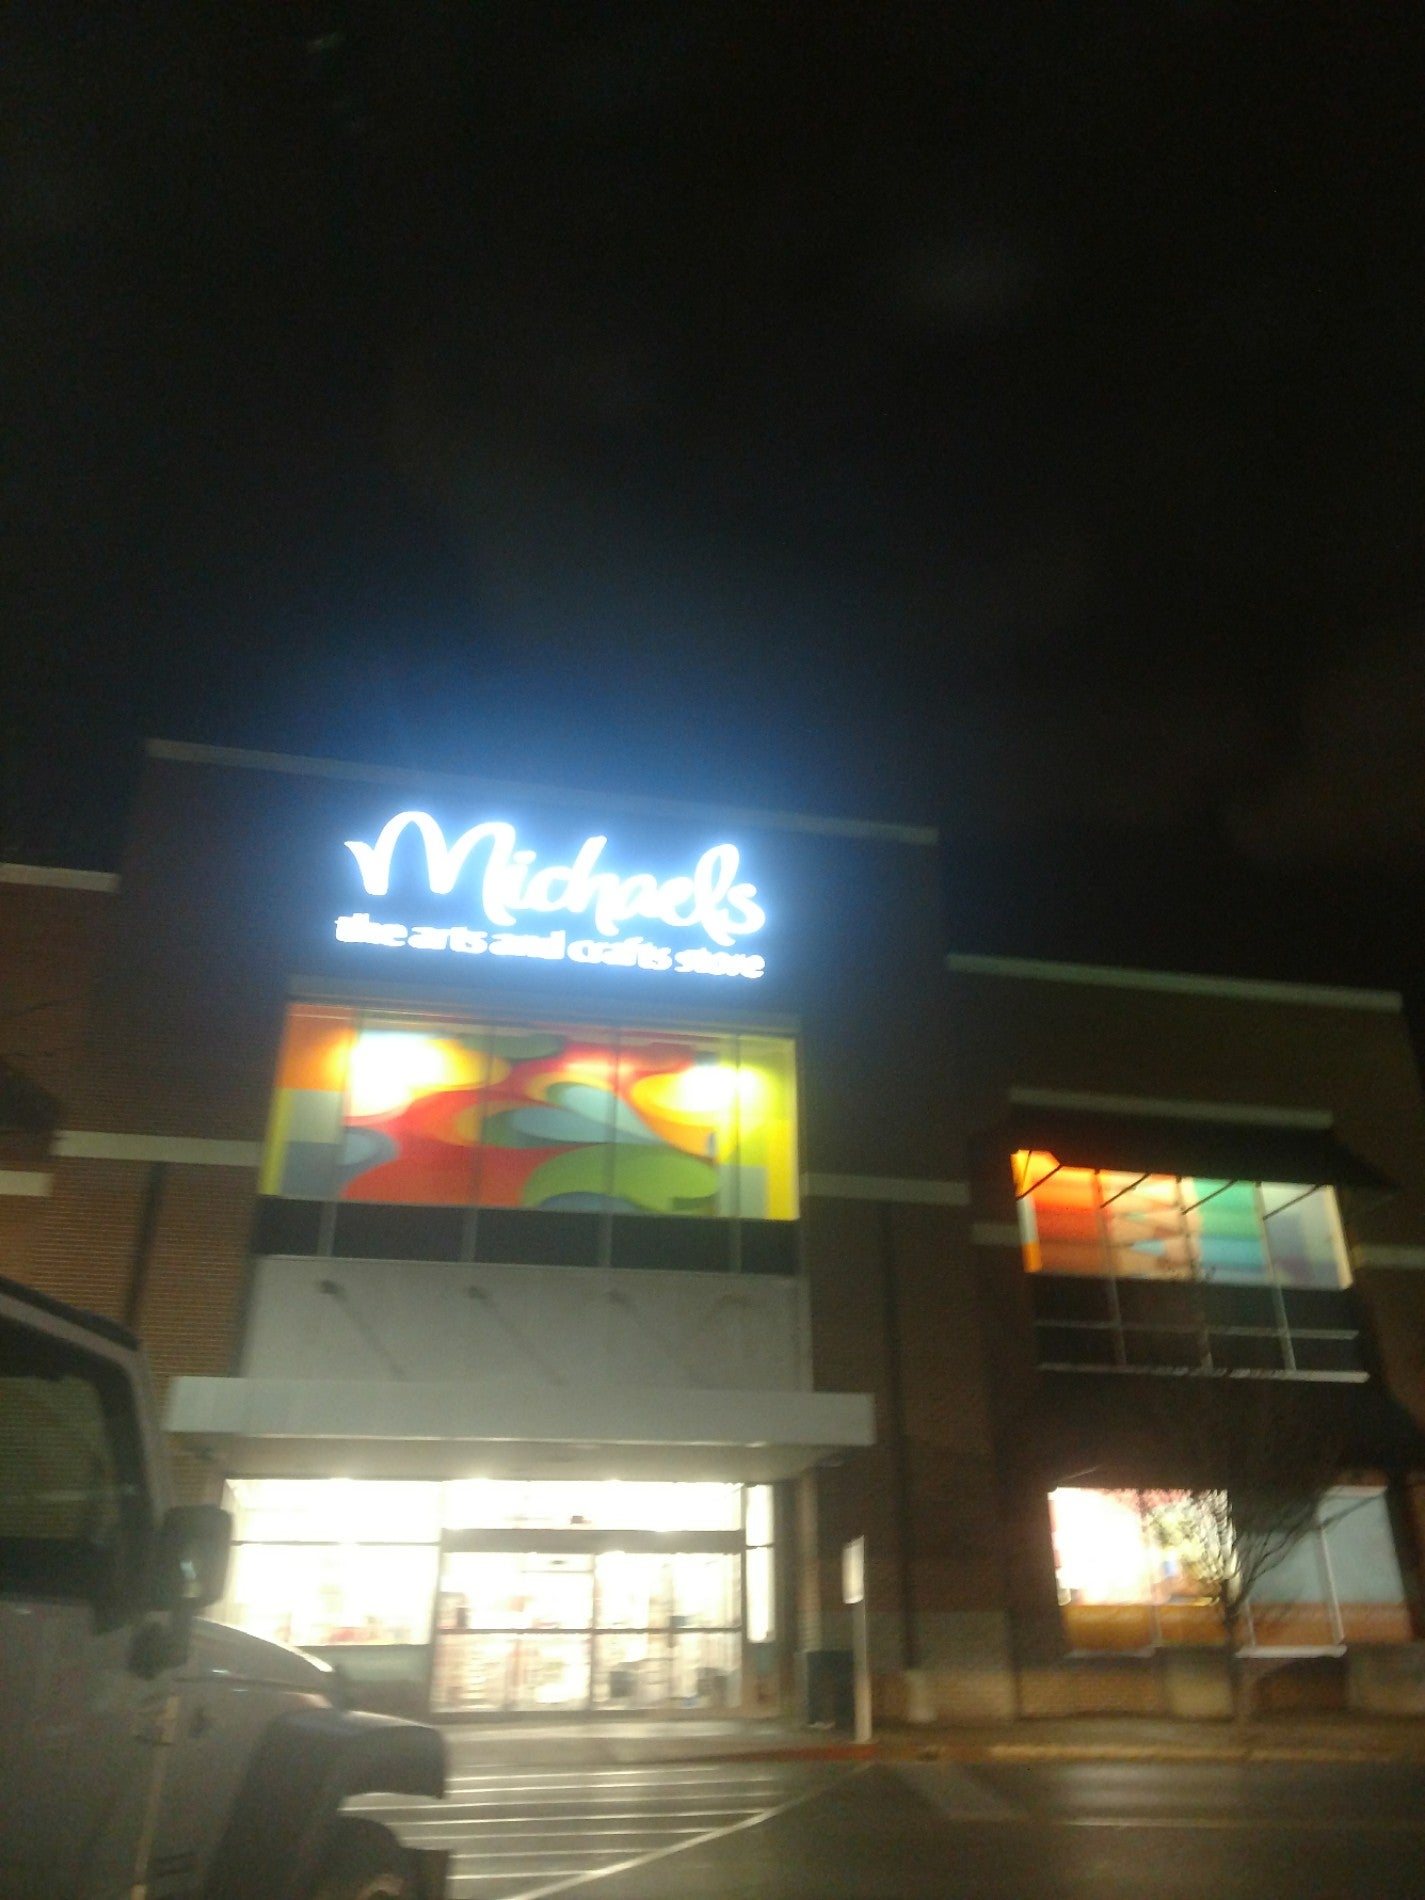 Michaels, 1519 S Brentwood Blvd, Saint Louis, MO, Arts and crafts